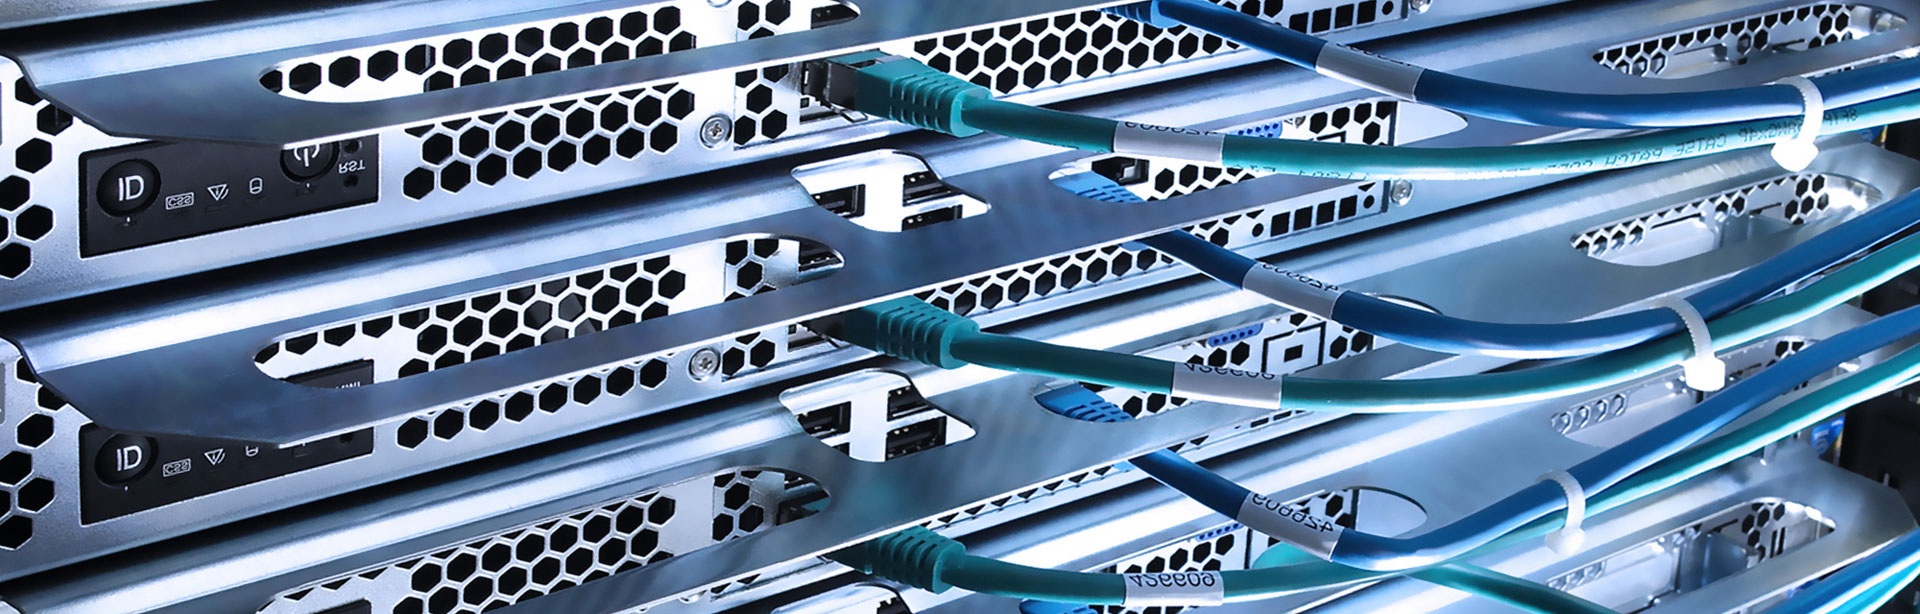 Richwood Louisiana Trusted Voice & Data Network Cabling Contractor